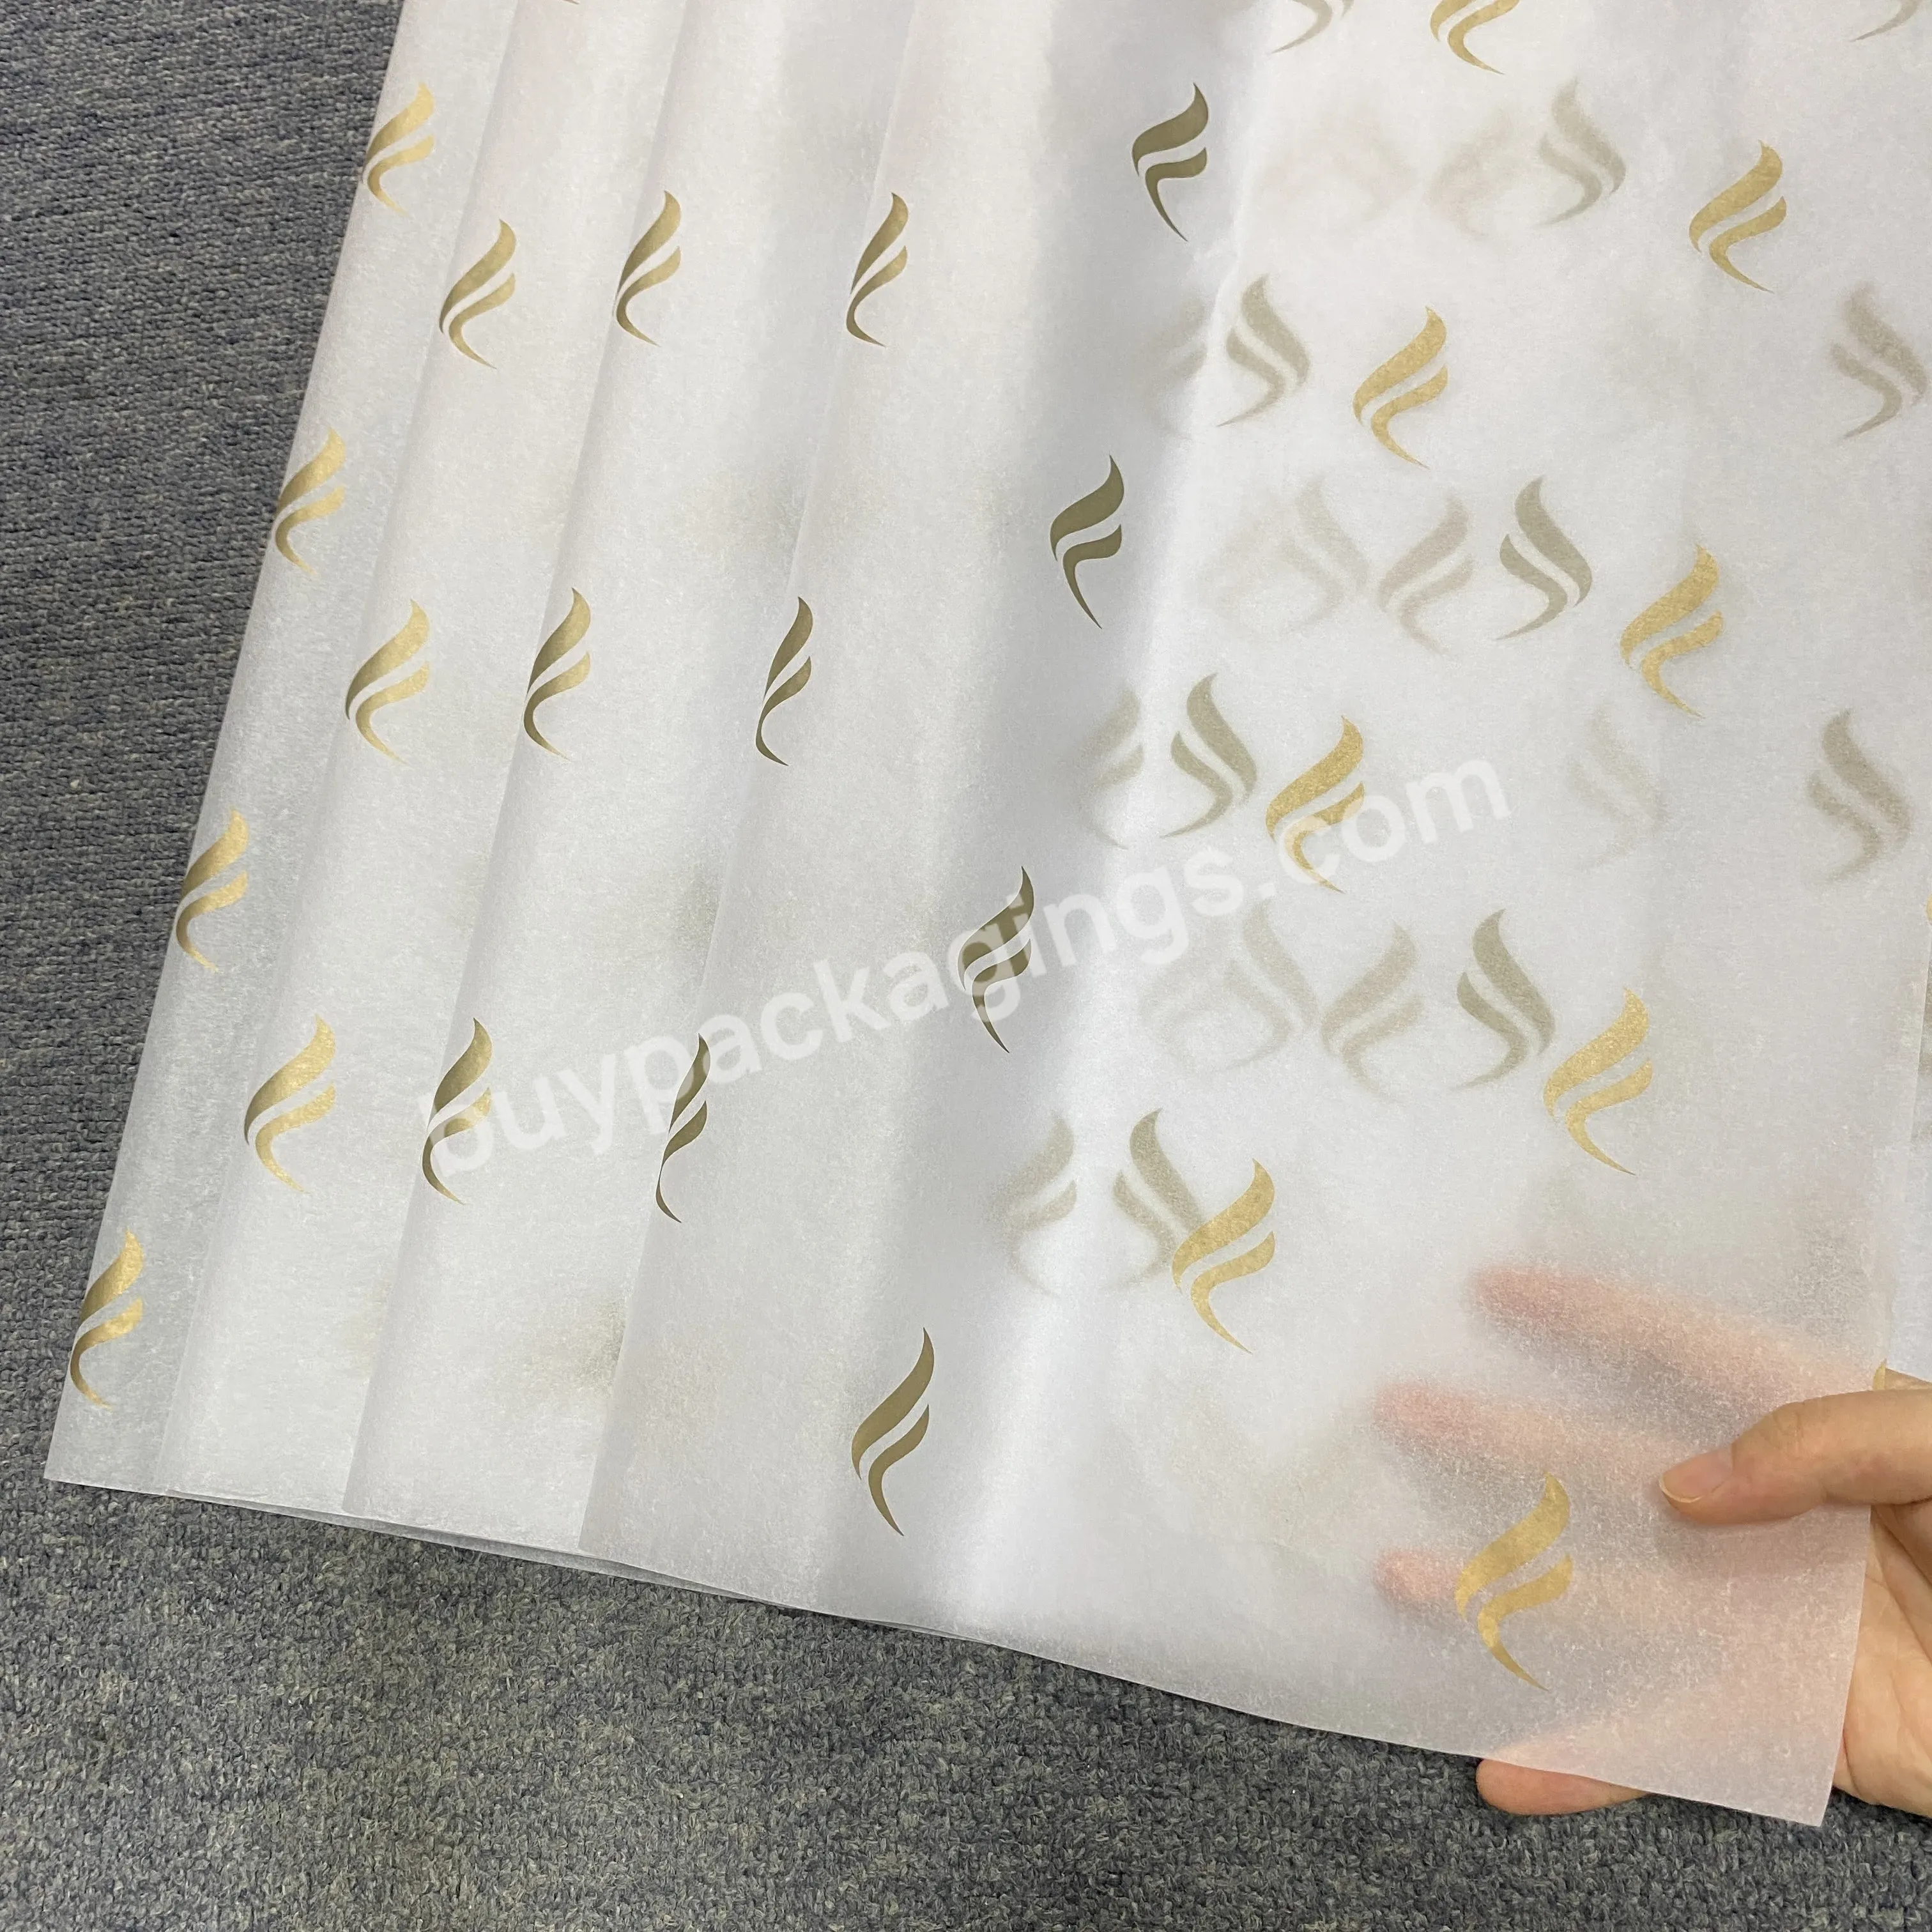 Fashionable Custom Printed Logo Tissue Wrapping Paper For Trending Products Packaging Clothes - Buy Wrapping Flowers And Clothing,Moq Is 100 Pcs,Customized Logo And Size.